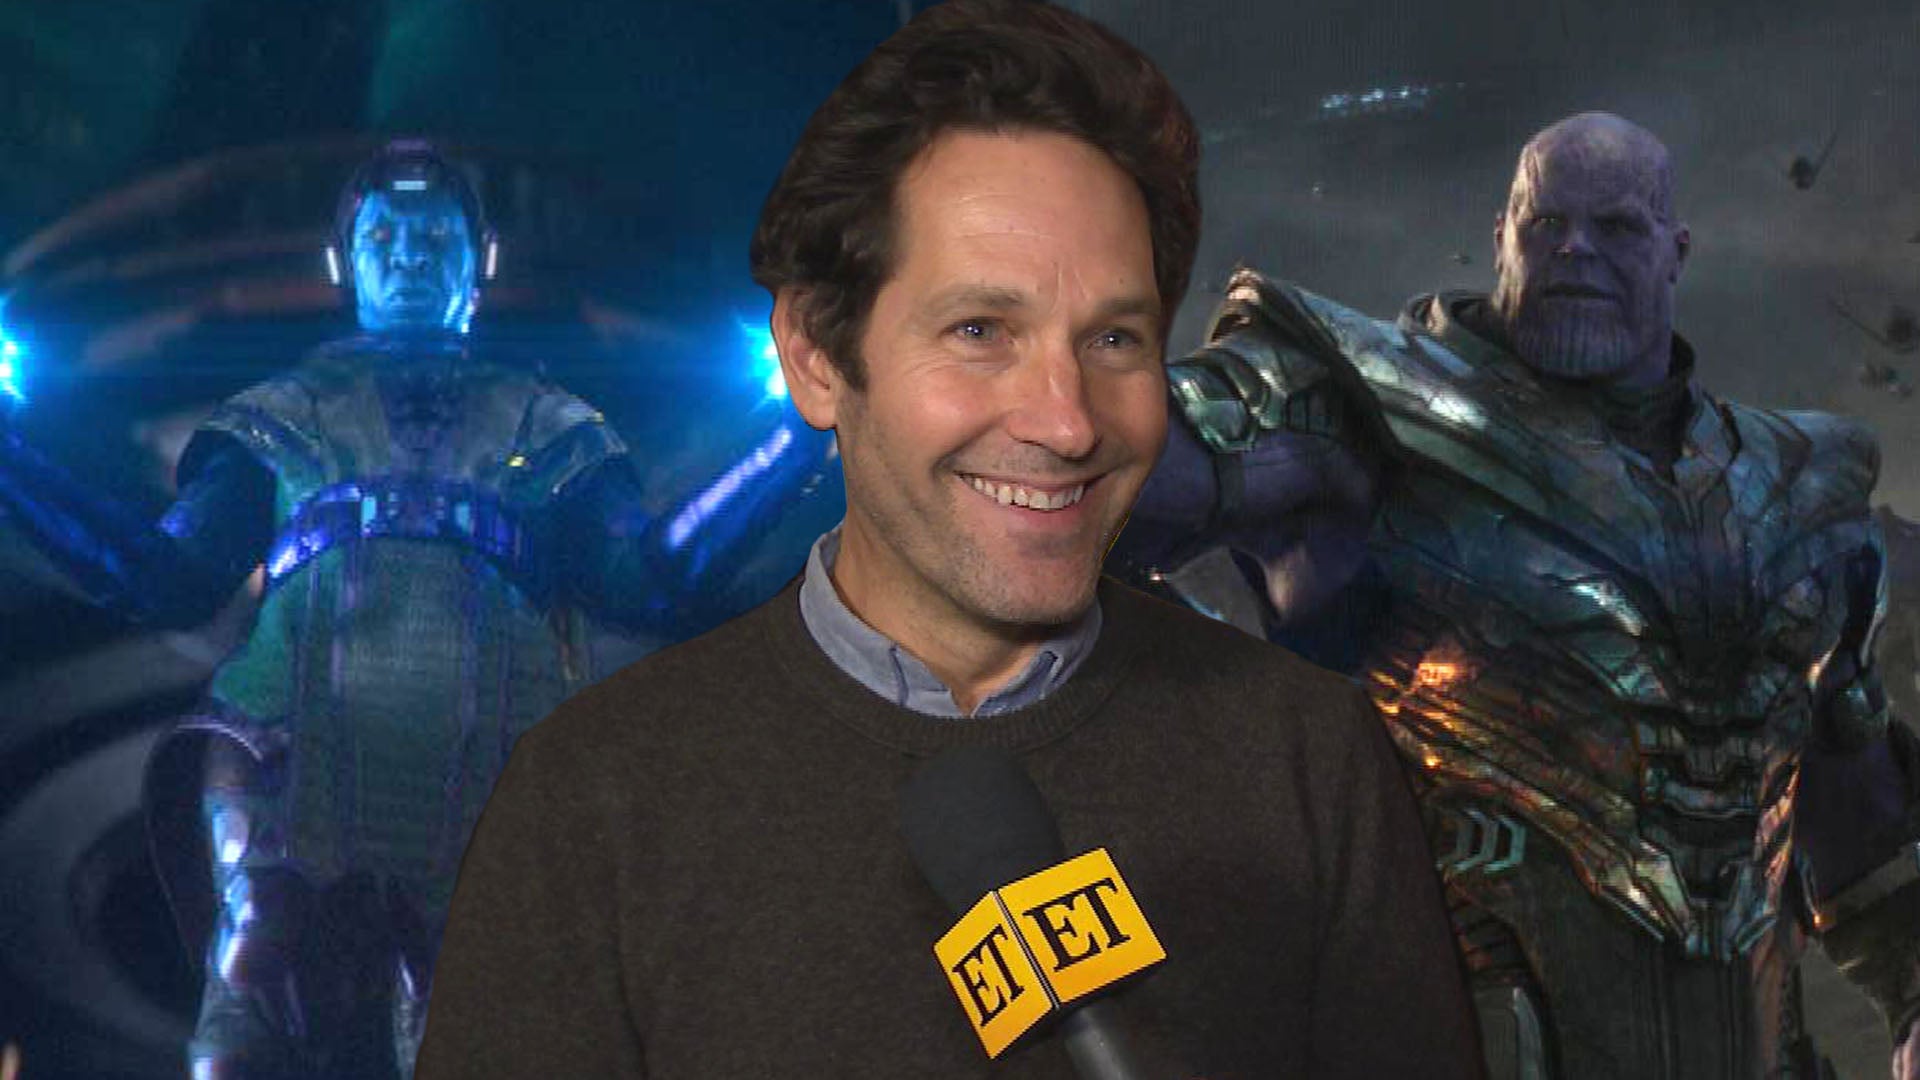 Star-studded 'Ant-Man' cast revealed at Comic-Con, includes Evangeline  Lilly, Michael Douglas, Paul Rudd – The Mercury News